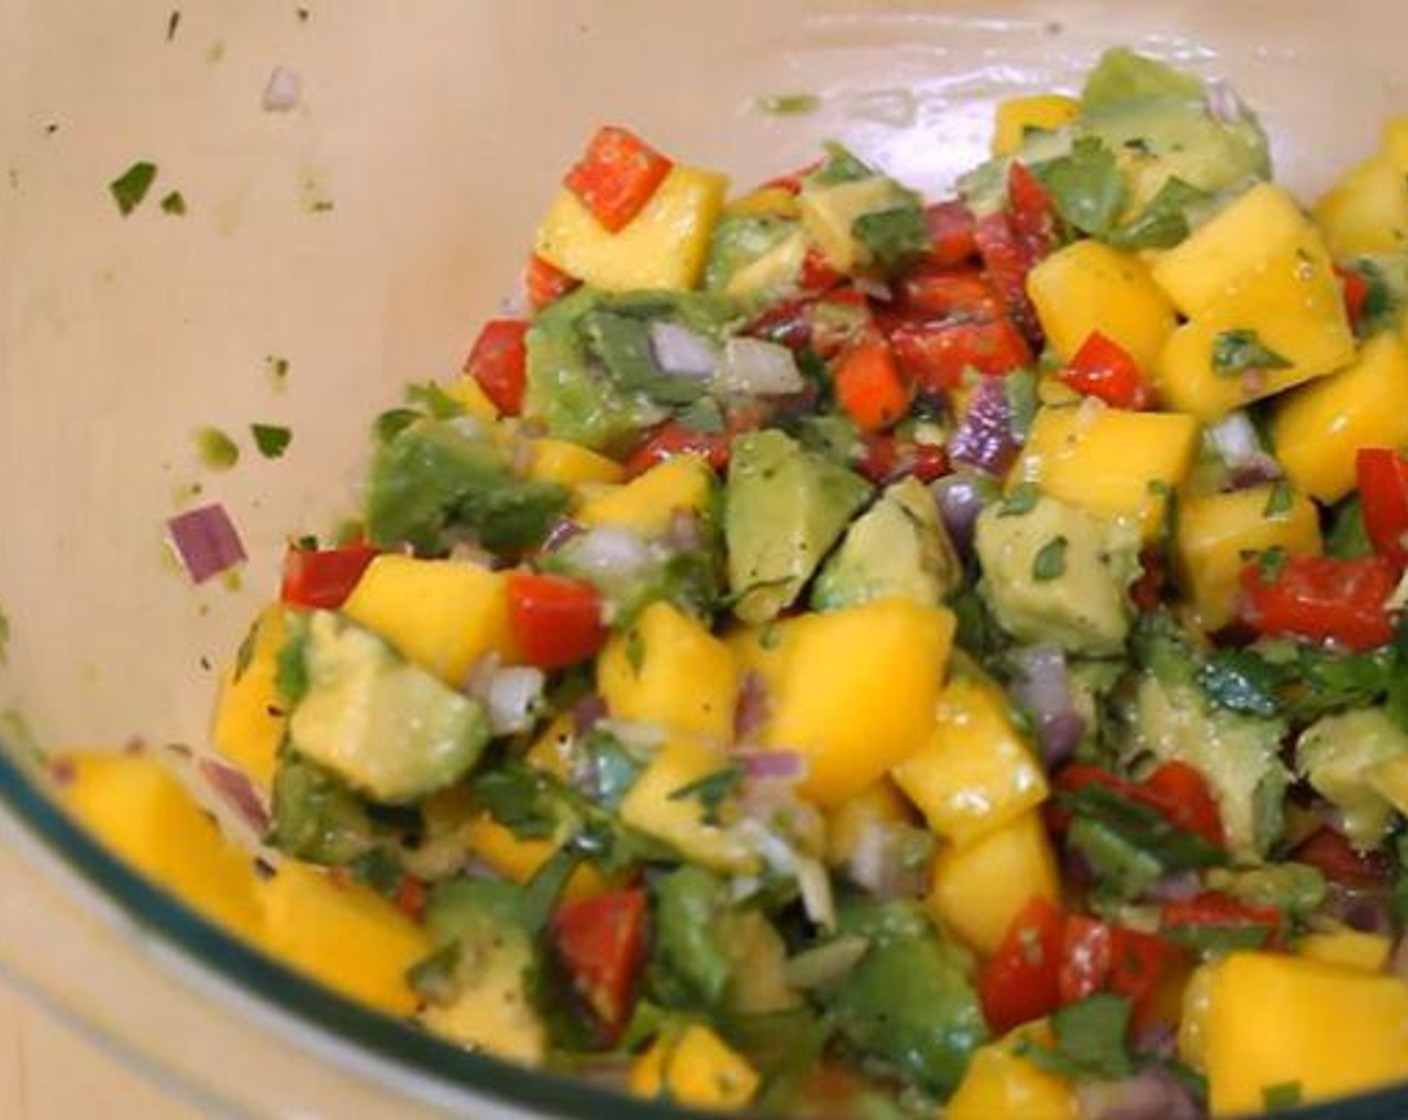 step 2 In a different bowl, add the Mango (1), Red Bell Pepper (1/3 cup), Red Onion (1/4 cup), Avocado (1), Jalapeño Peppers (to taste) and Fresh Cilantro (1/4 cup). Juice the Limes (2) over the top and add the Salt (1/2 tsp) and Ground Black Pepper (to taste). Mix thoroughly.